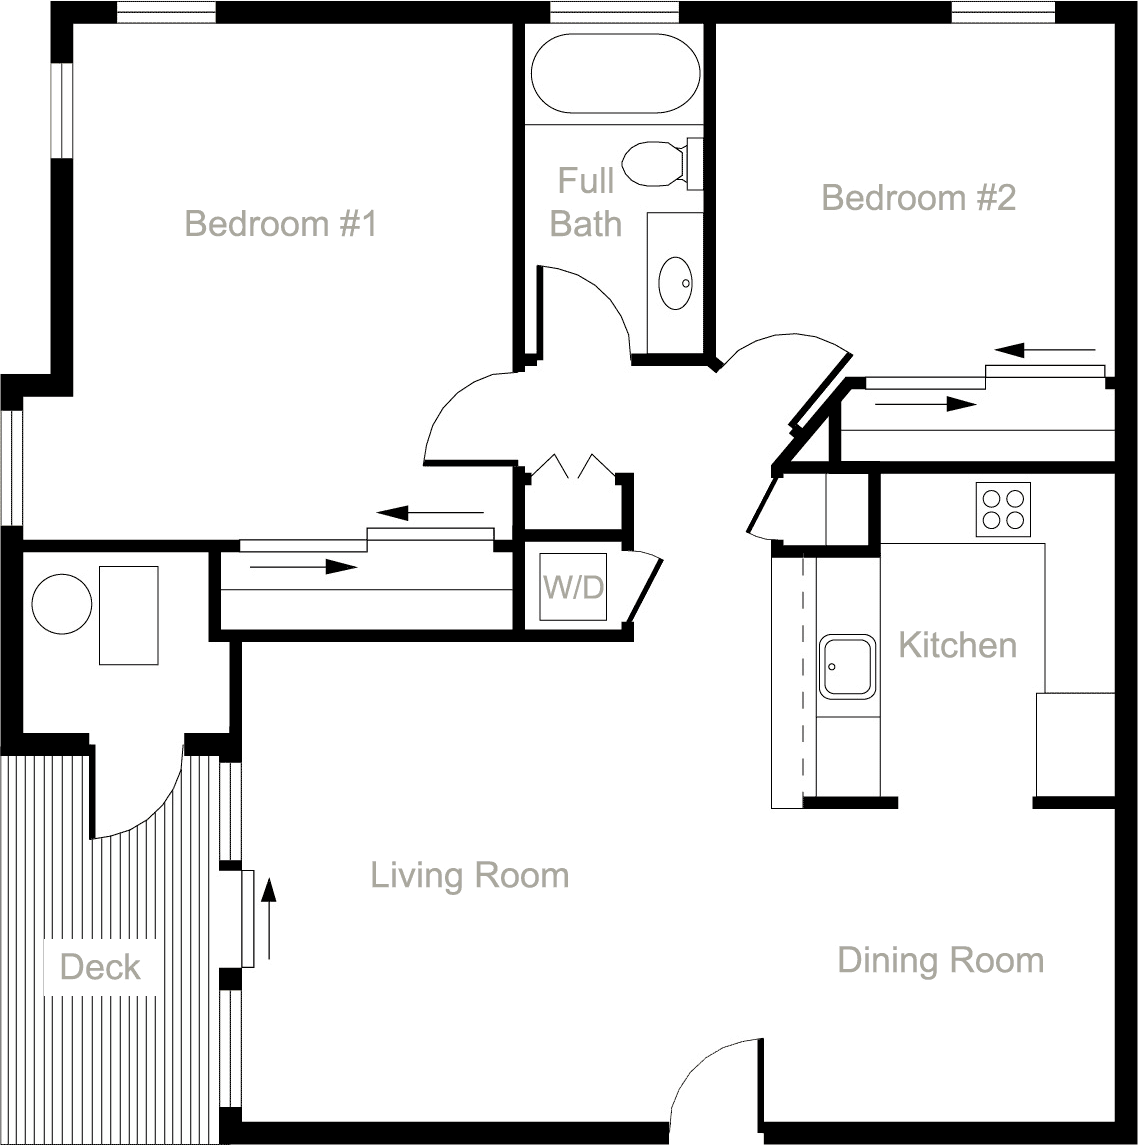 1st Floor Plan - The Excellor I (Upper)